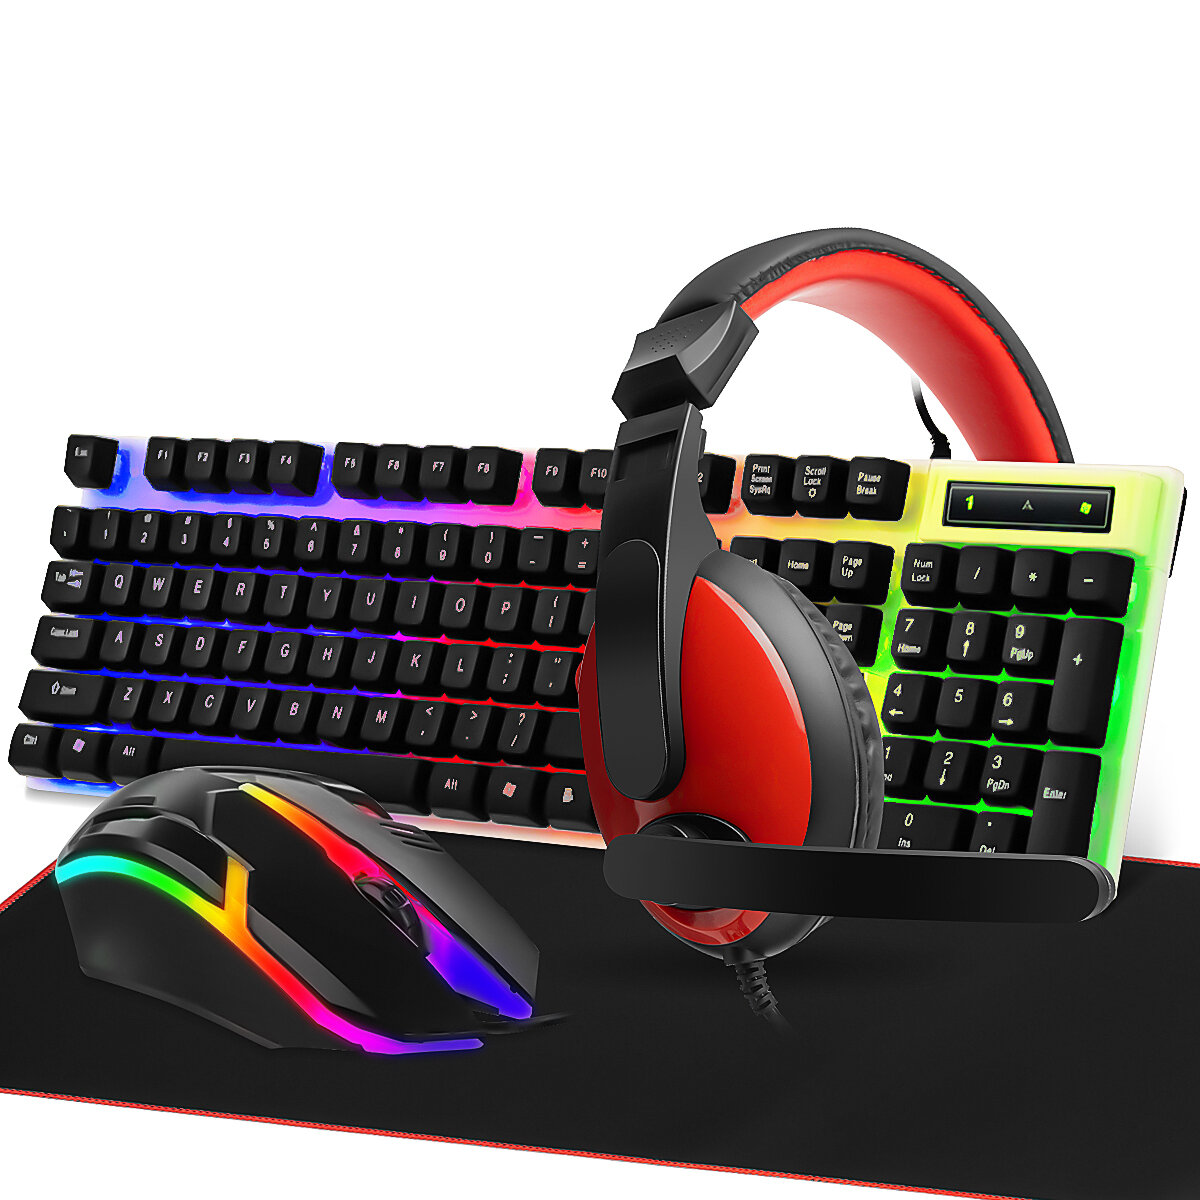 SHPADOO 4 in 1 Keyboard Mouse Headset Mousepad Combo 104-Keys Suspended Translucent Keycaps Colorful Glow Backlight Mous